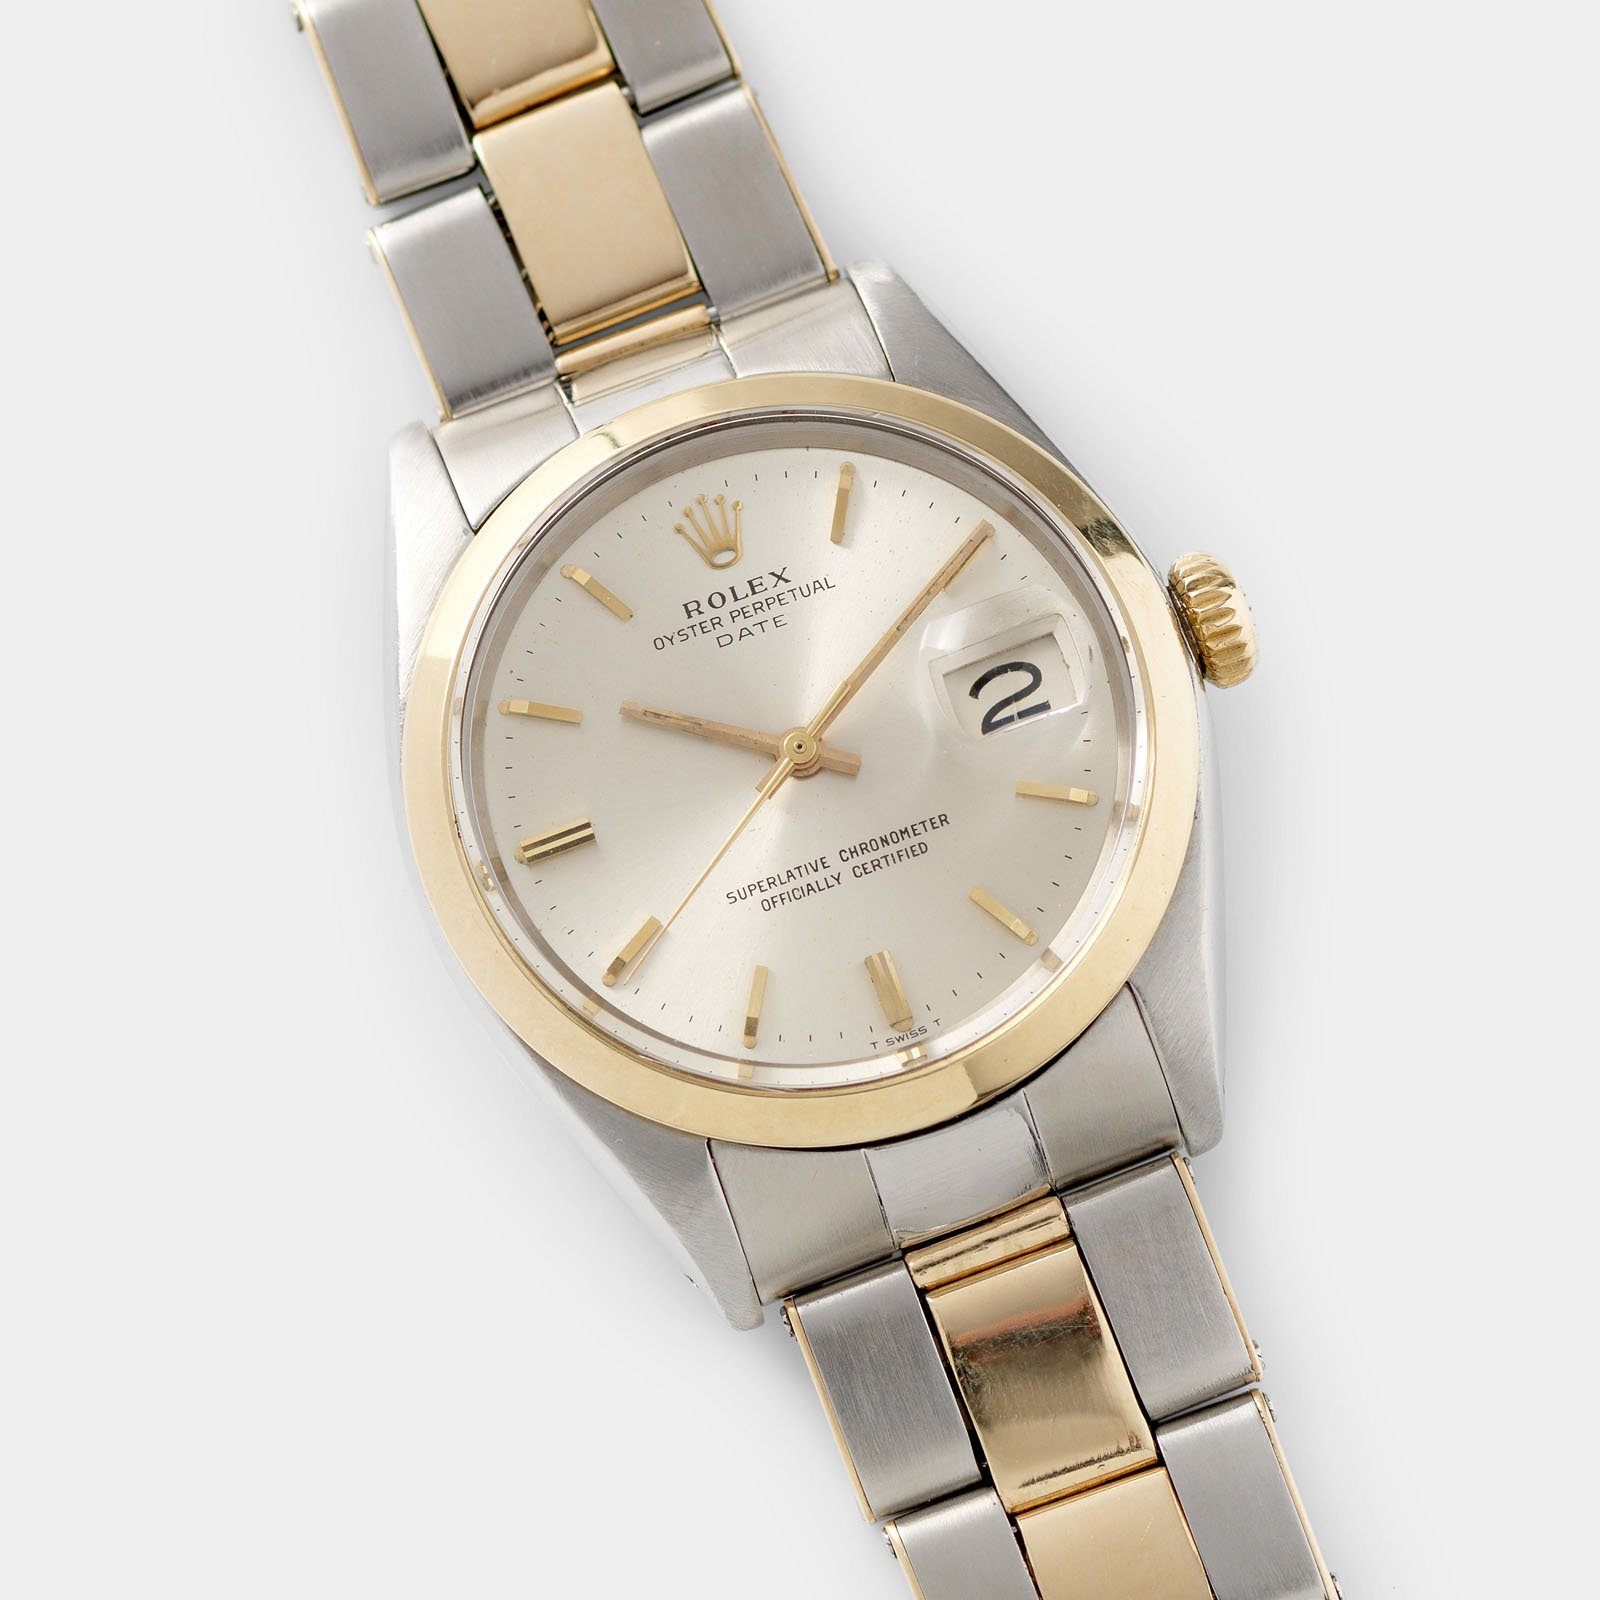 Rolex Oyster Perpetual Date Two-Tone Ref 1500